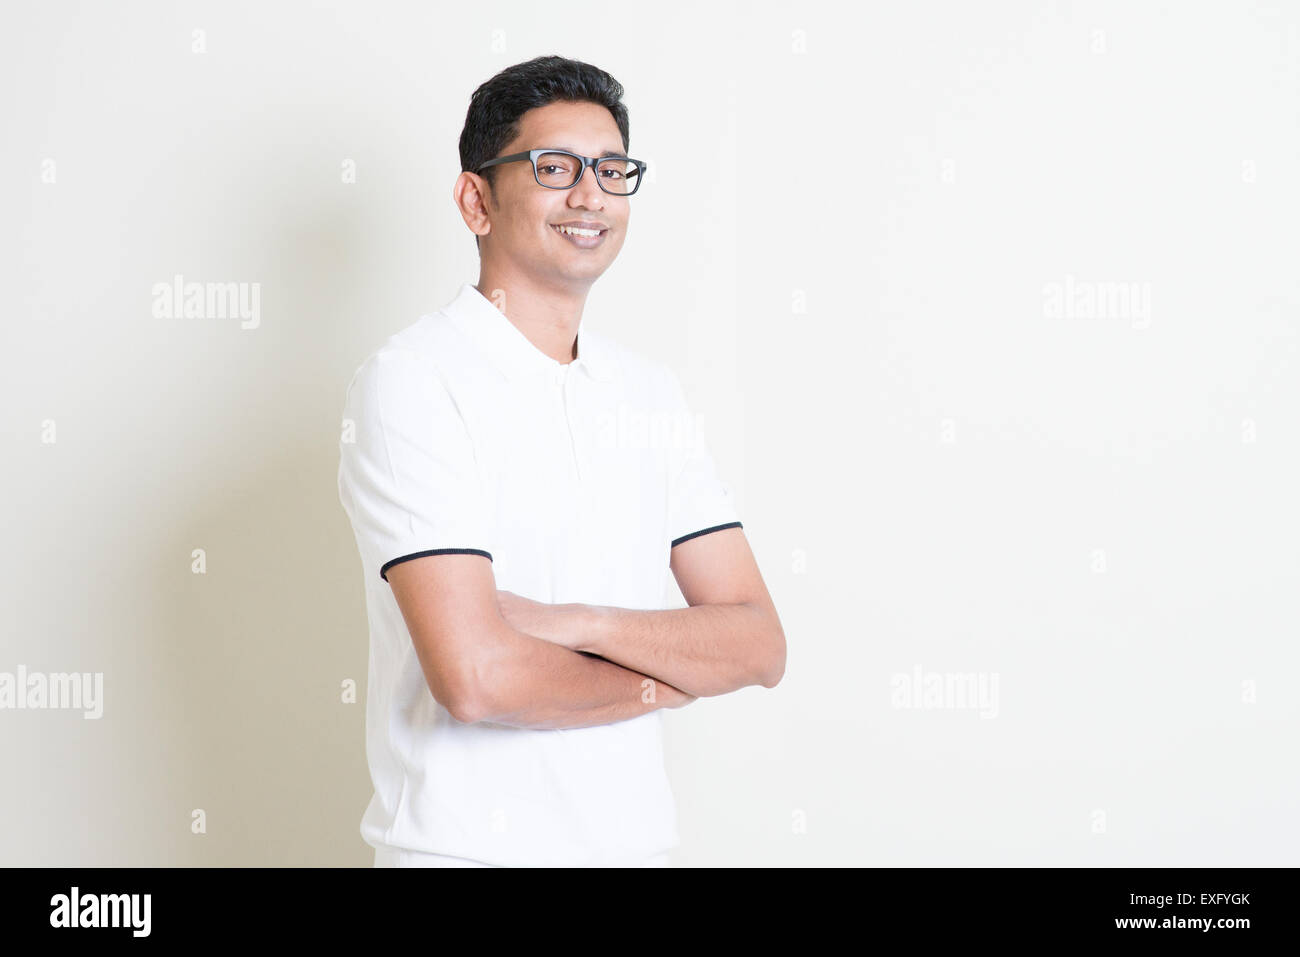 Portrait of happy Indian guy arms crossed looking at camera. Asian man standing on plain background with shadow and copy space. Stock Photo